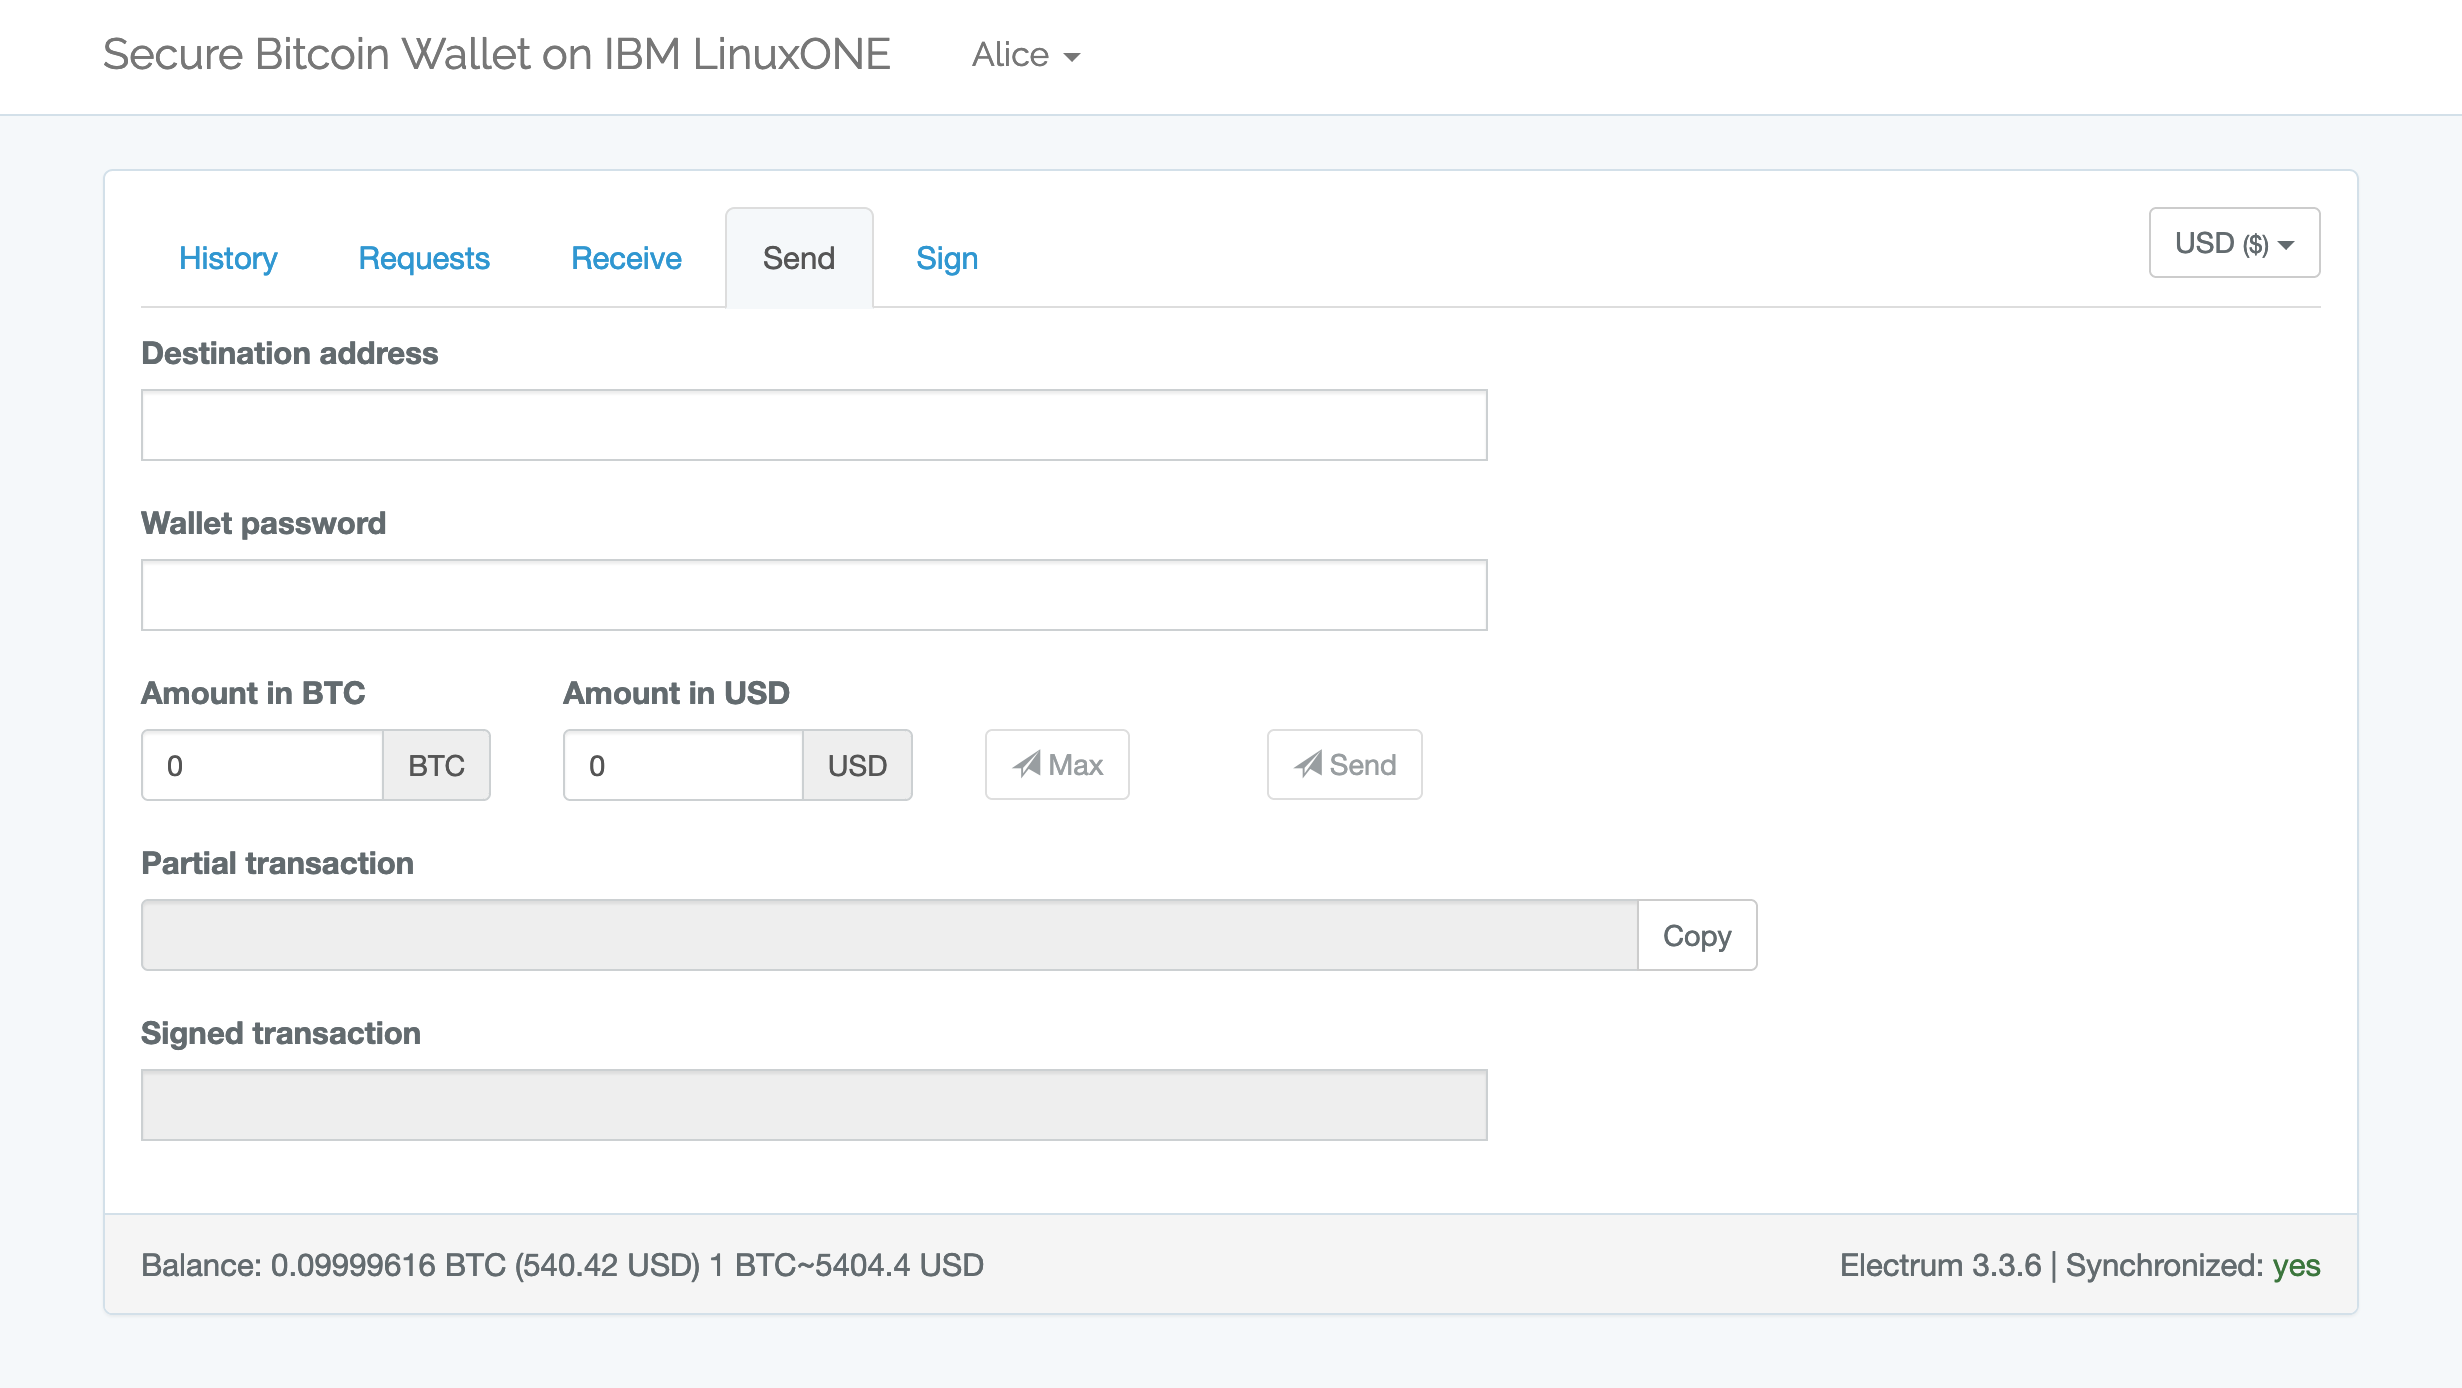 Secure Bitcoin Wallet on IBM LinuxONE